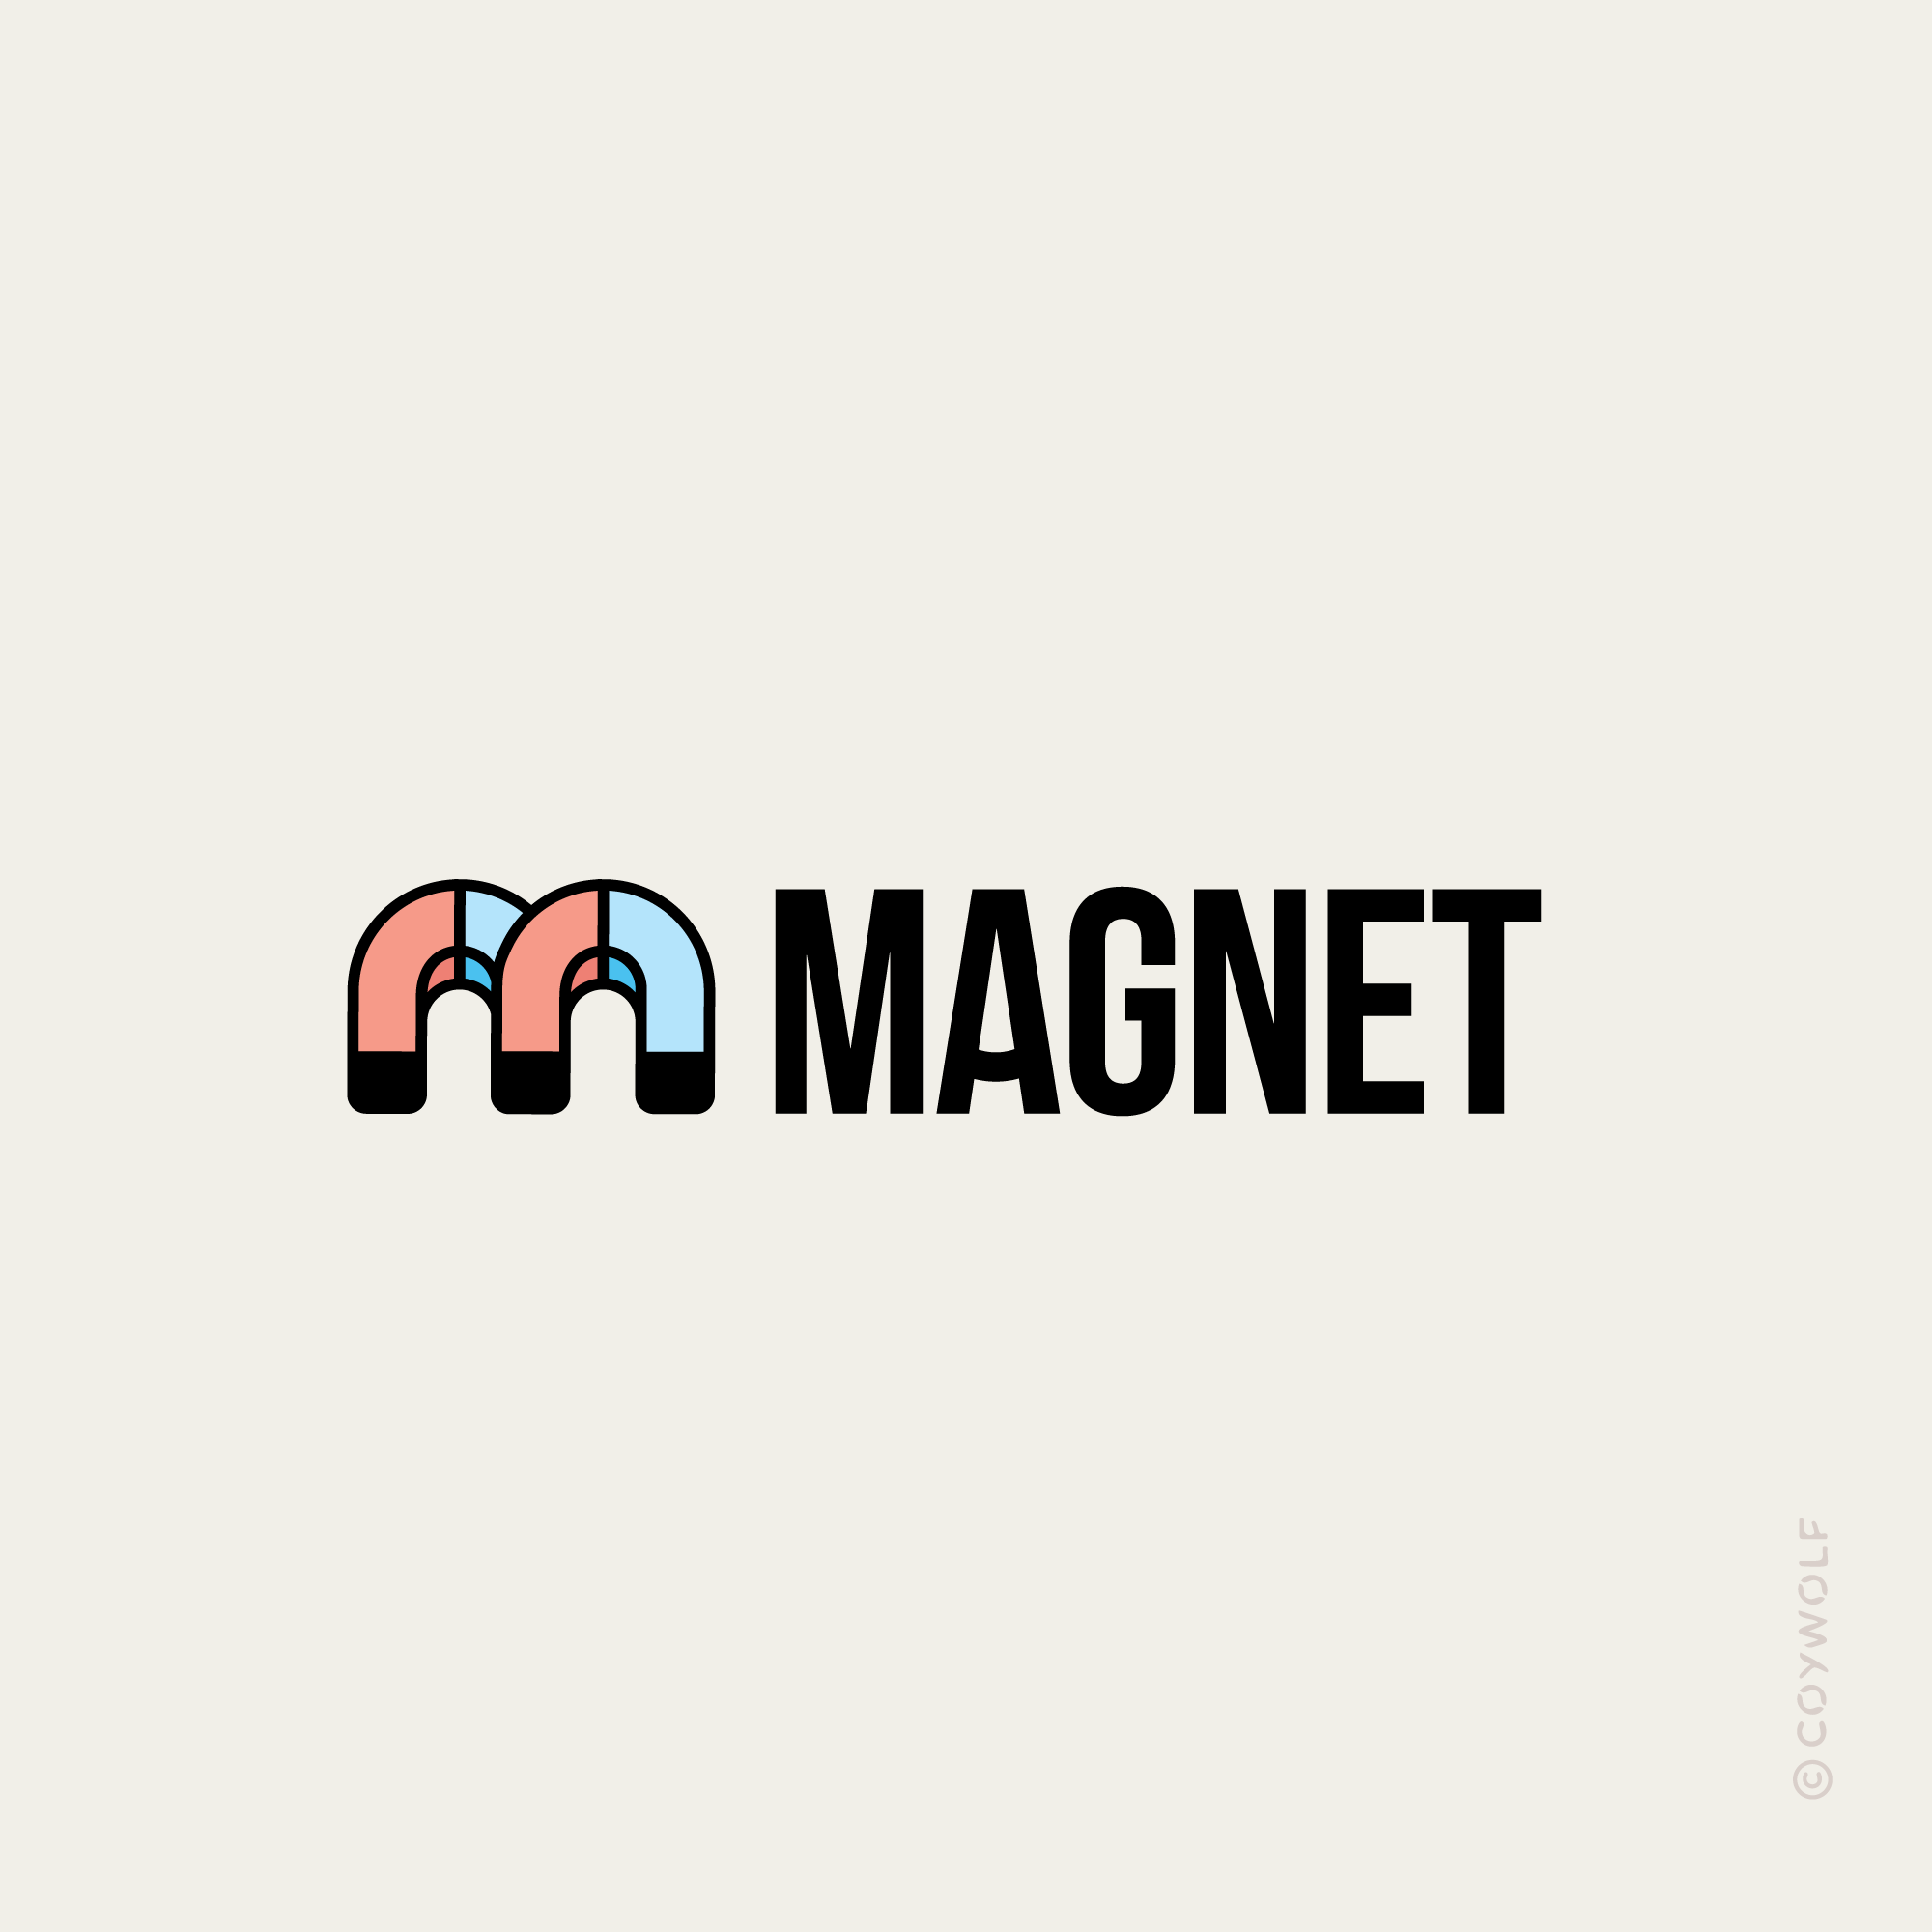 Magnet Logo Vector Art, Icons, and Graphics for Free Download